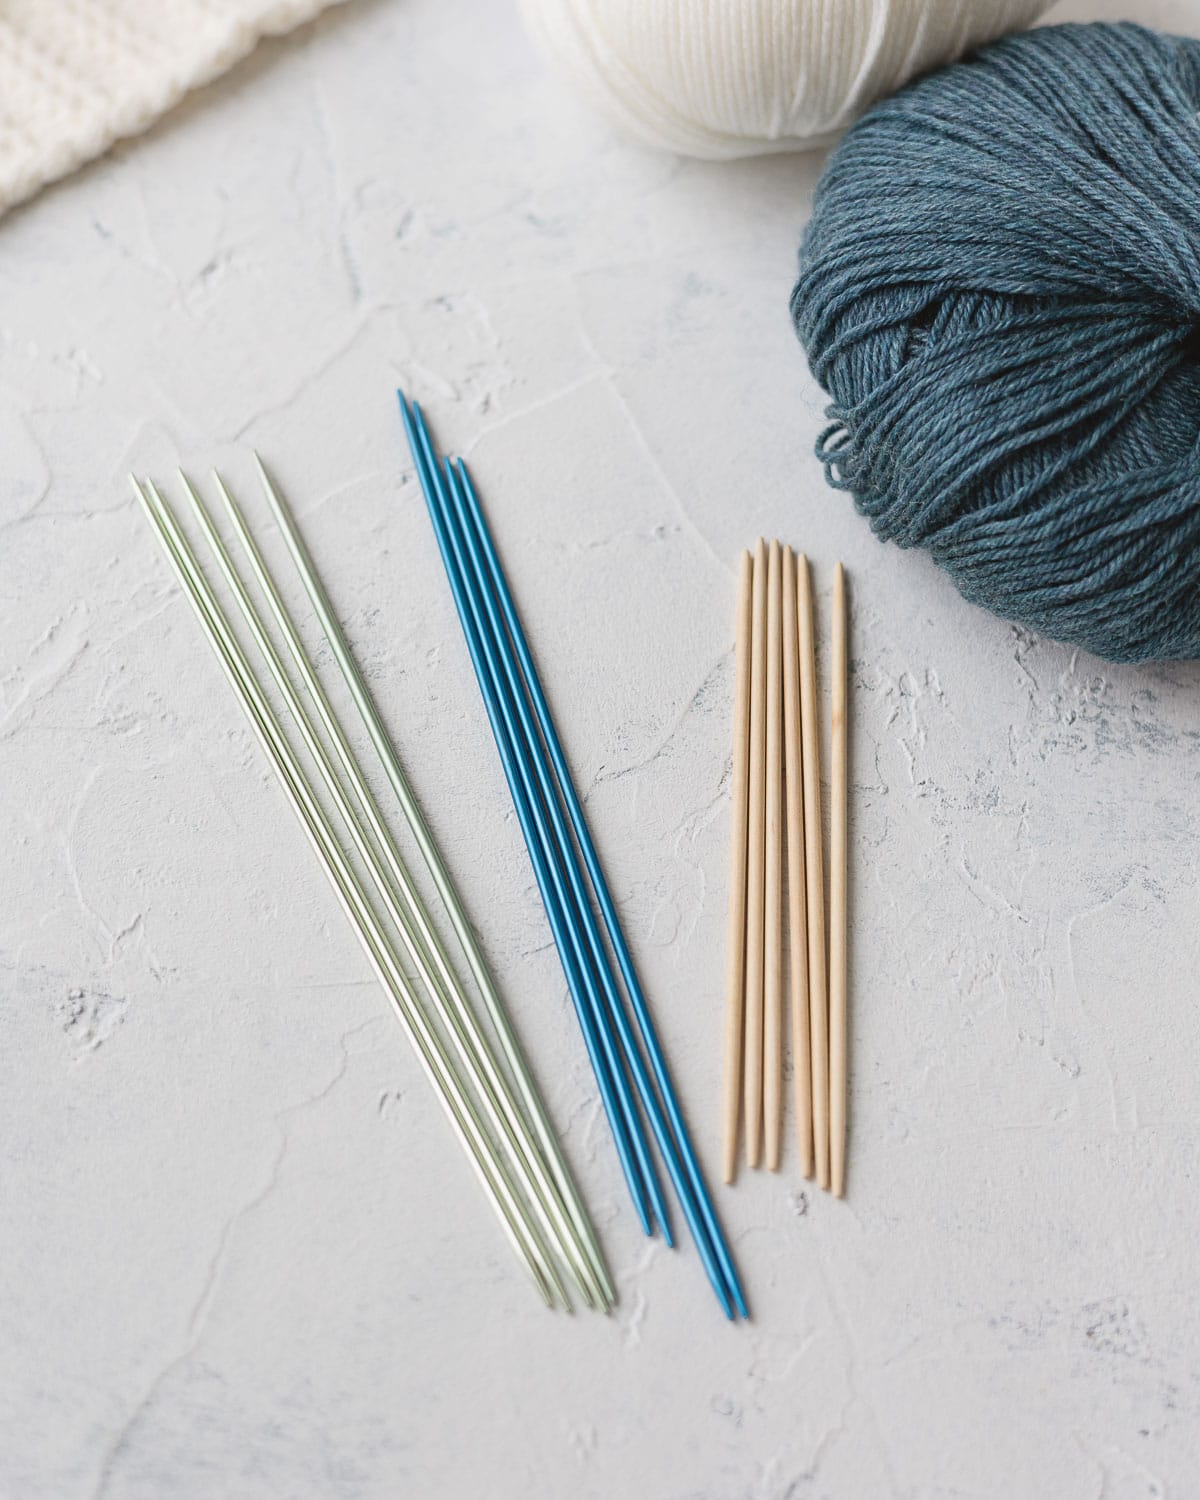 Three sets of double-pointed knitting needles.